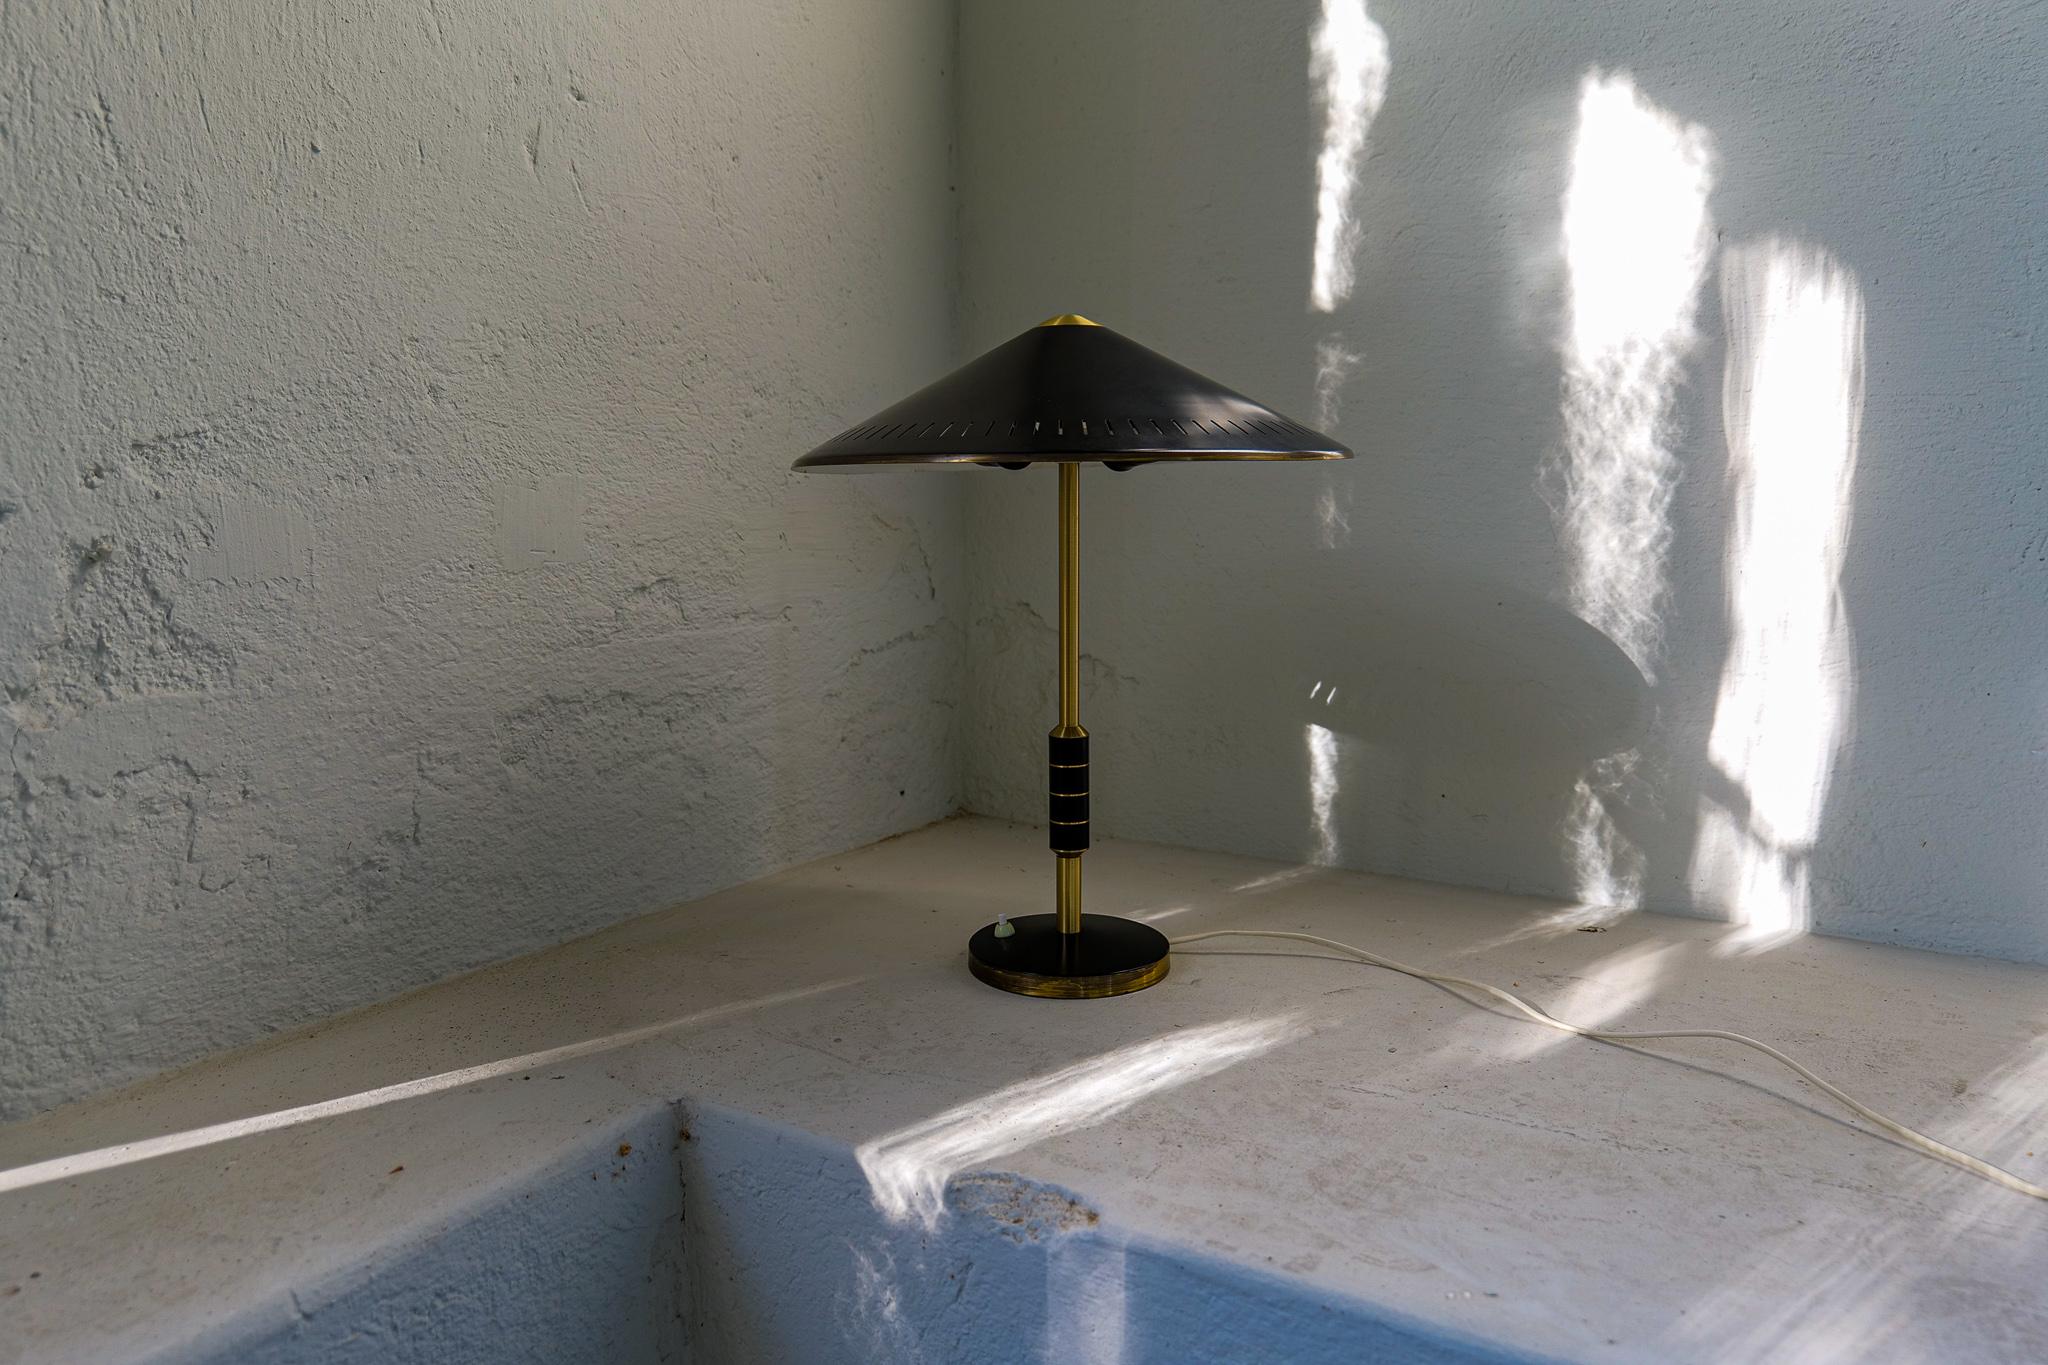 Midcentury Modern Table Lamp by Bent Karlby Produced by Lyfa in Denmark, 1956 For Sale 10